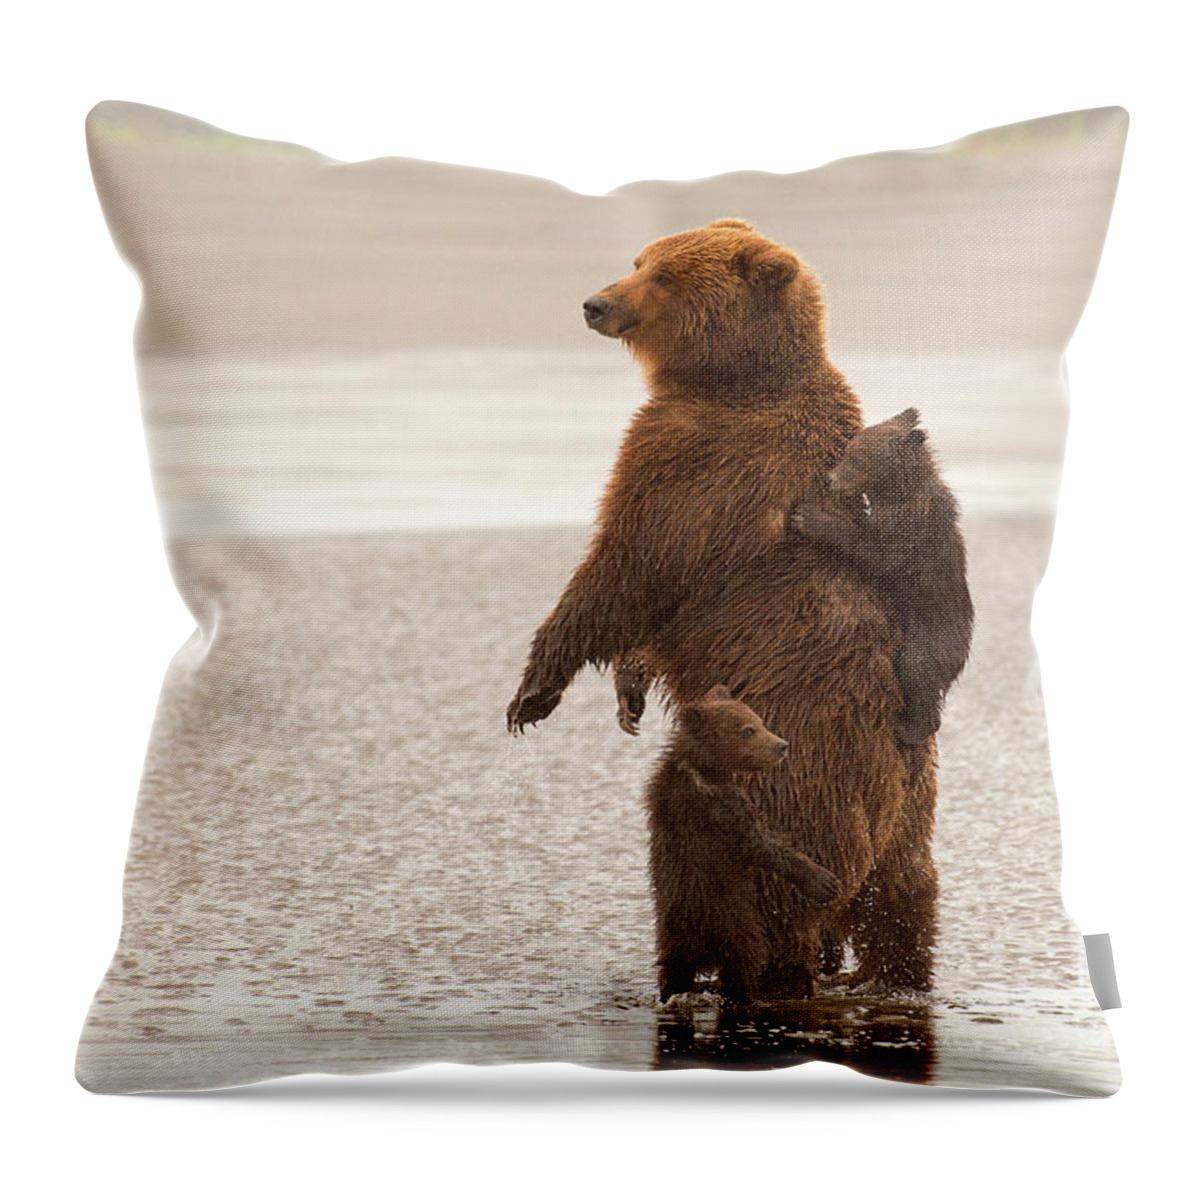 Alaskan Brown Bears Throw Pillow featuring the photograph Puddles by Aaron Whittemore